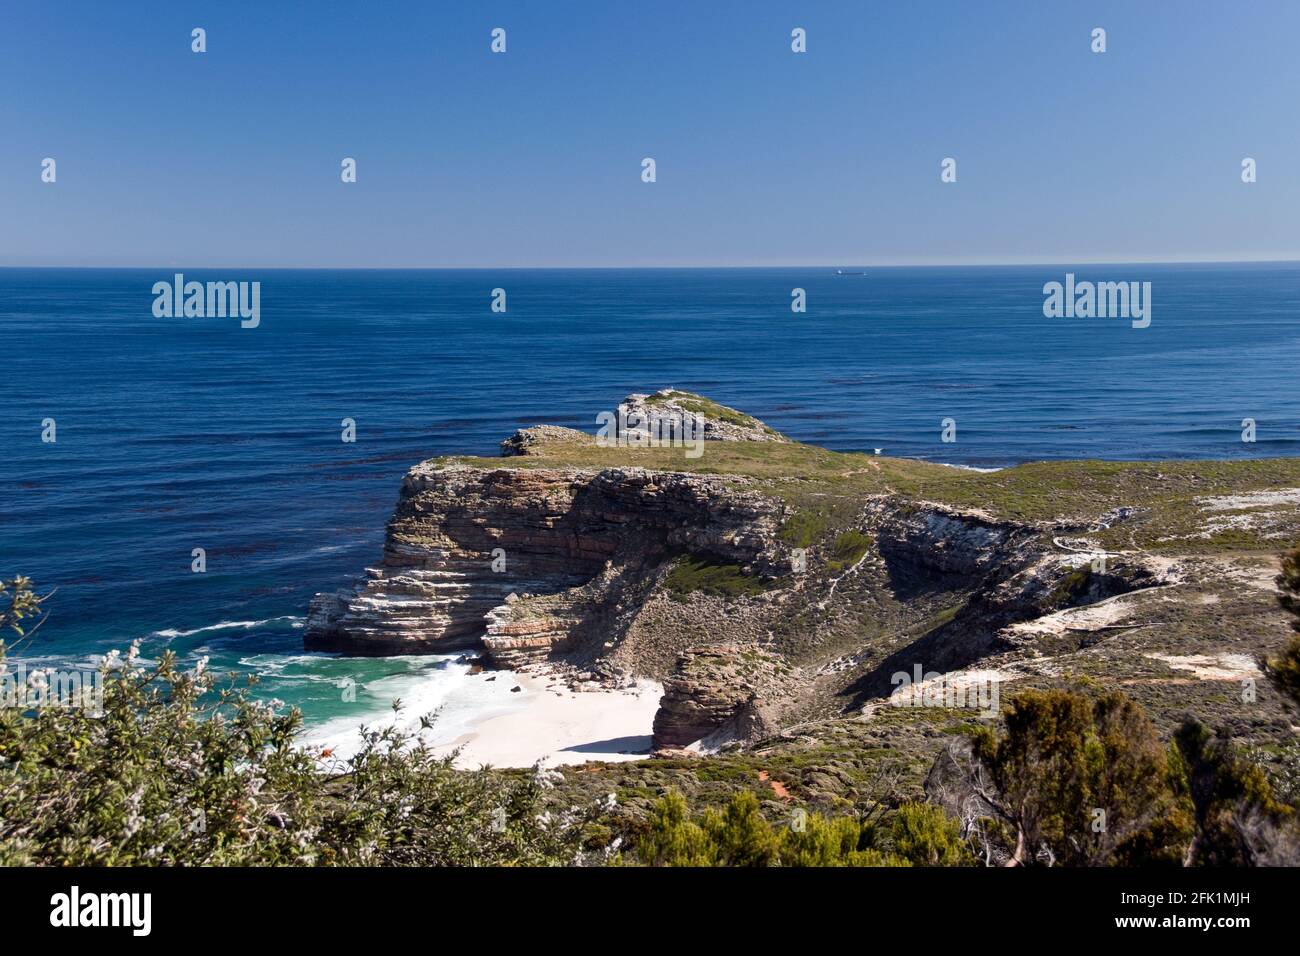 View from the Cape Point Lighthouse, in Table Mountain National Park, on the Cape of Good Hope, South Africa. Stock Photo